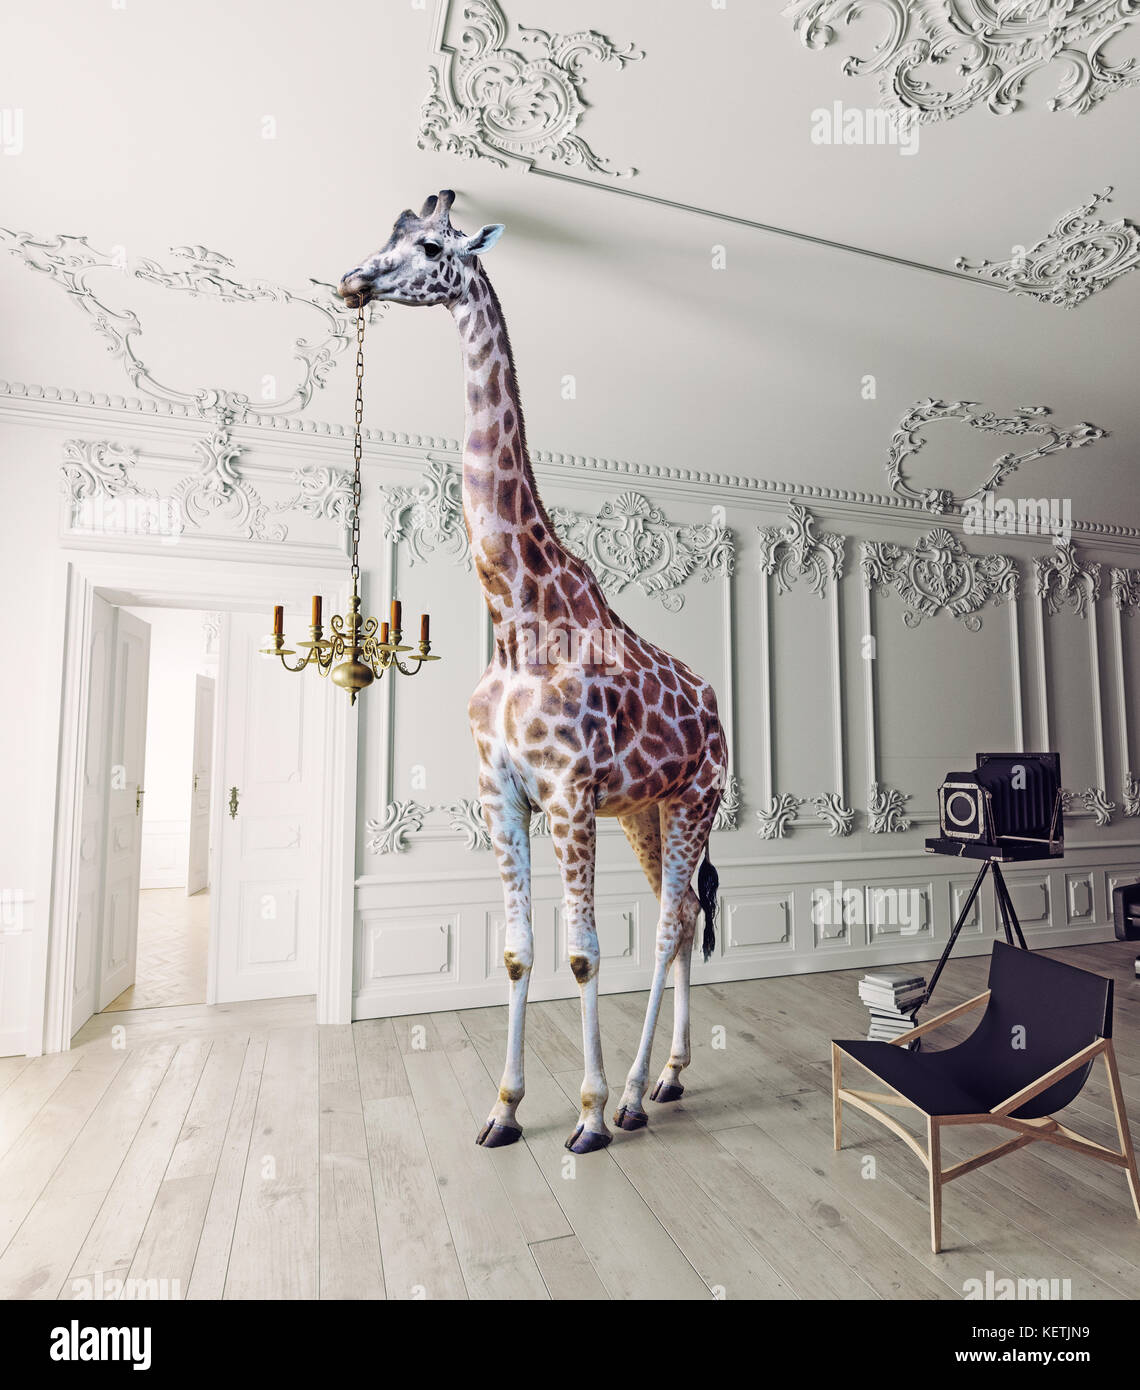 the giraffe hold the chandelier in the luxury decorated interior Stock Photo